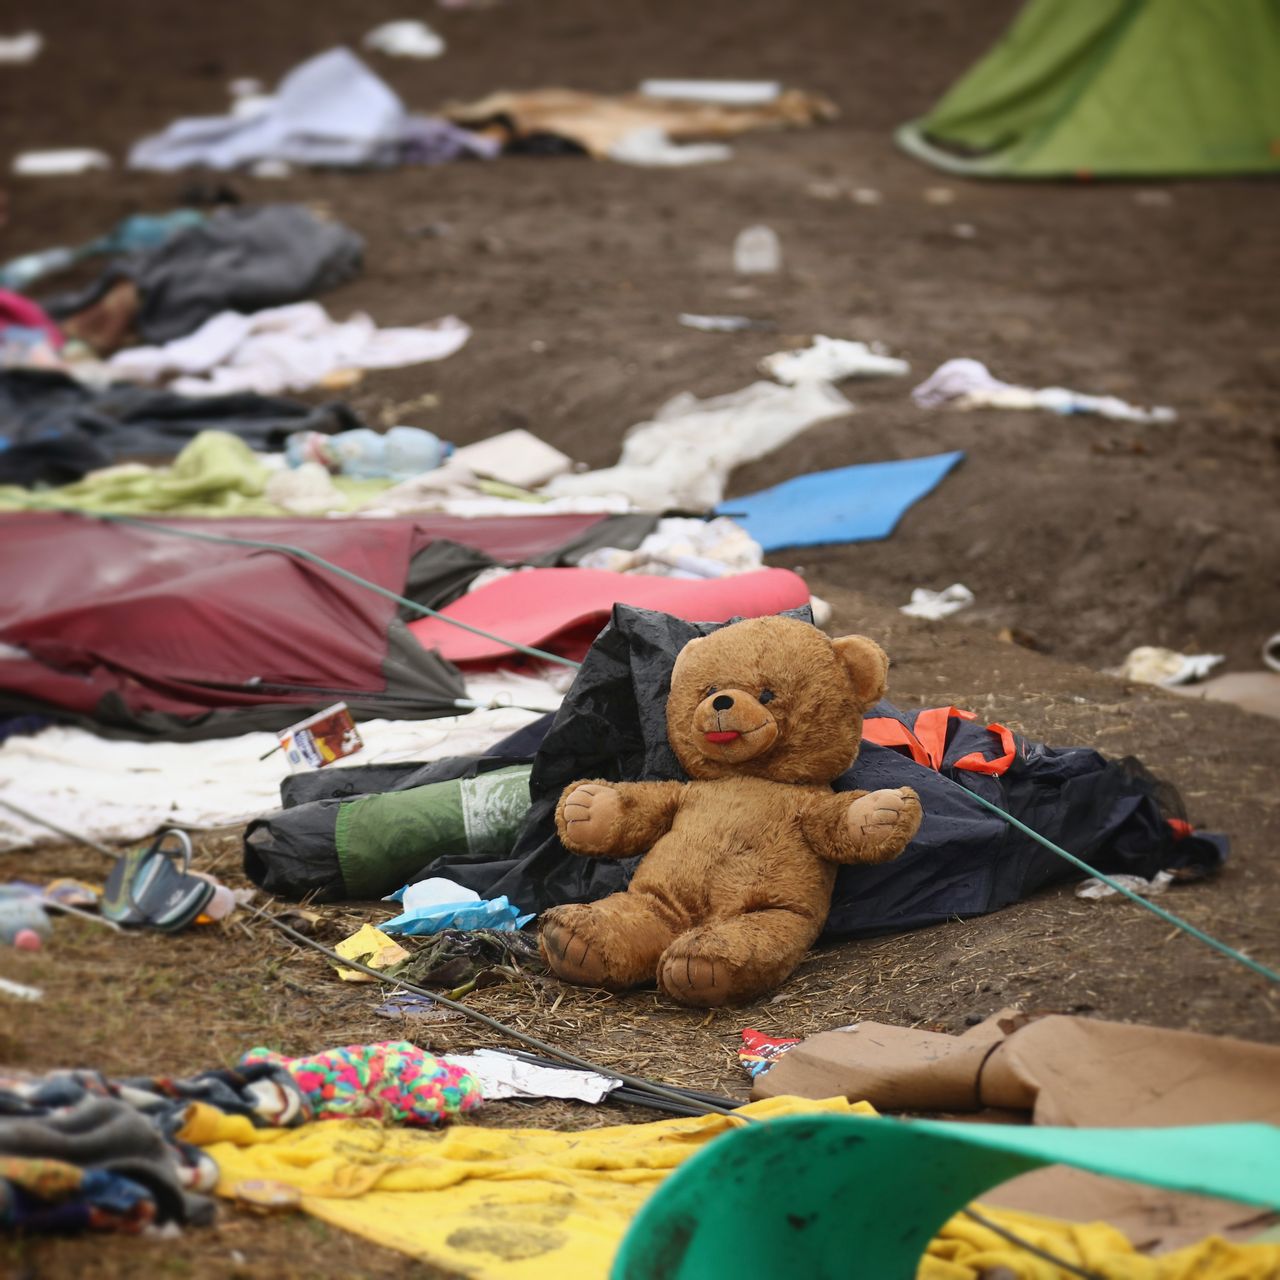 A teddy bear, tents and clothing.